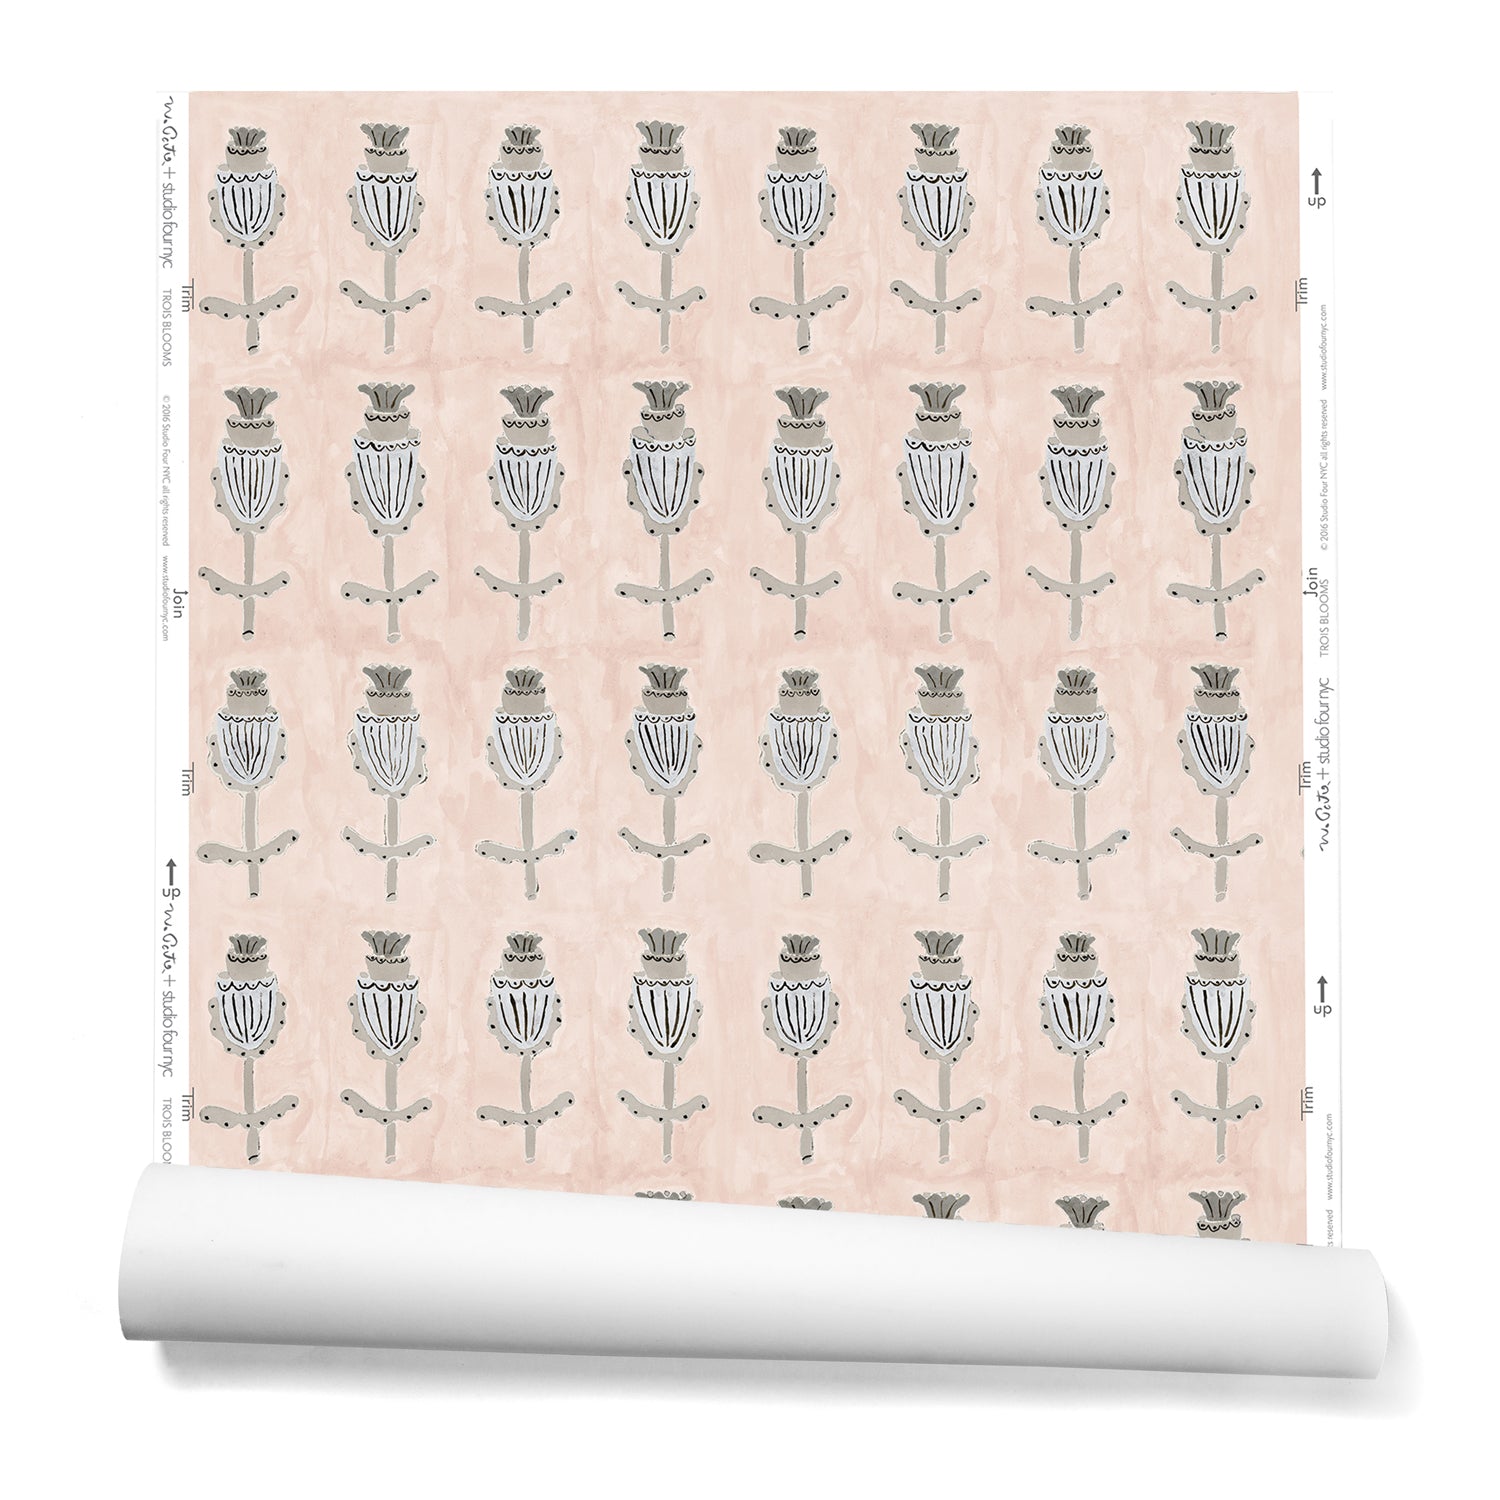 A hanging roll of wallpaper with repeating rows of a watercolor flowers in tan and gray on a light pink background.